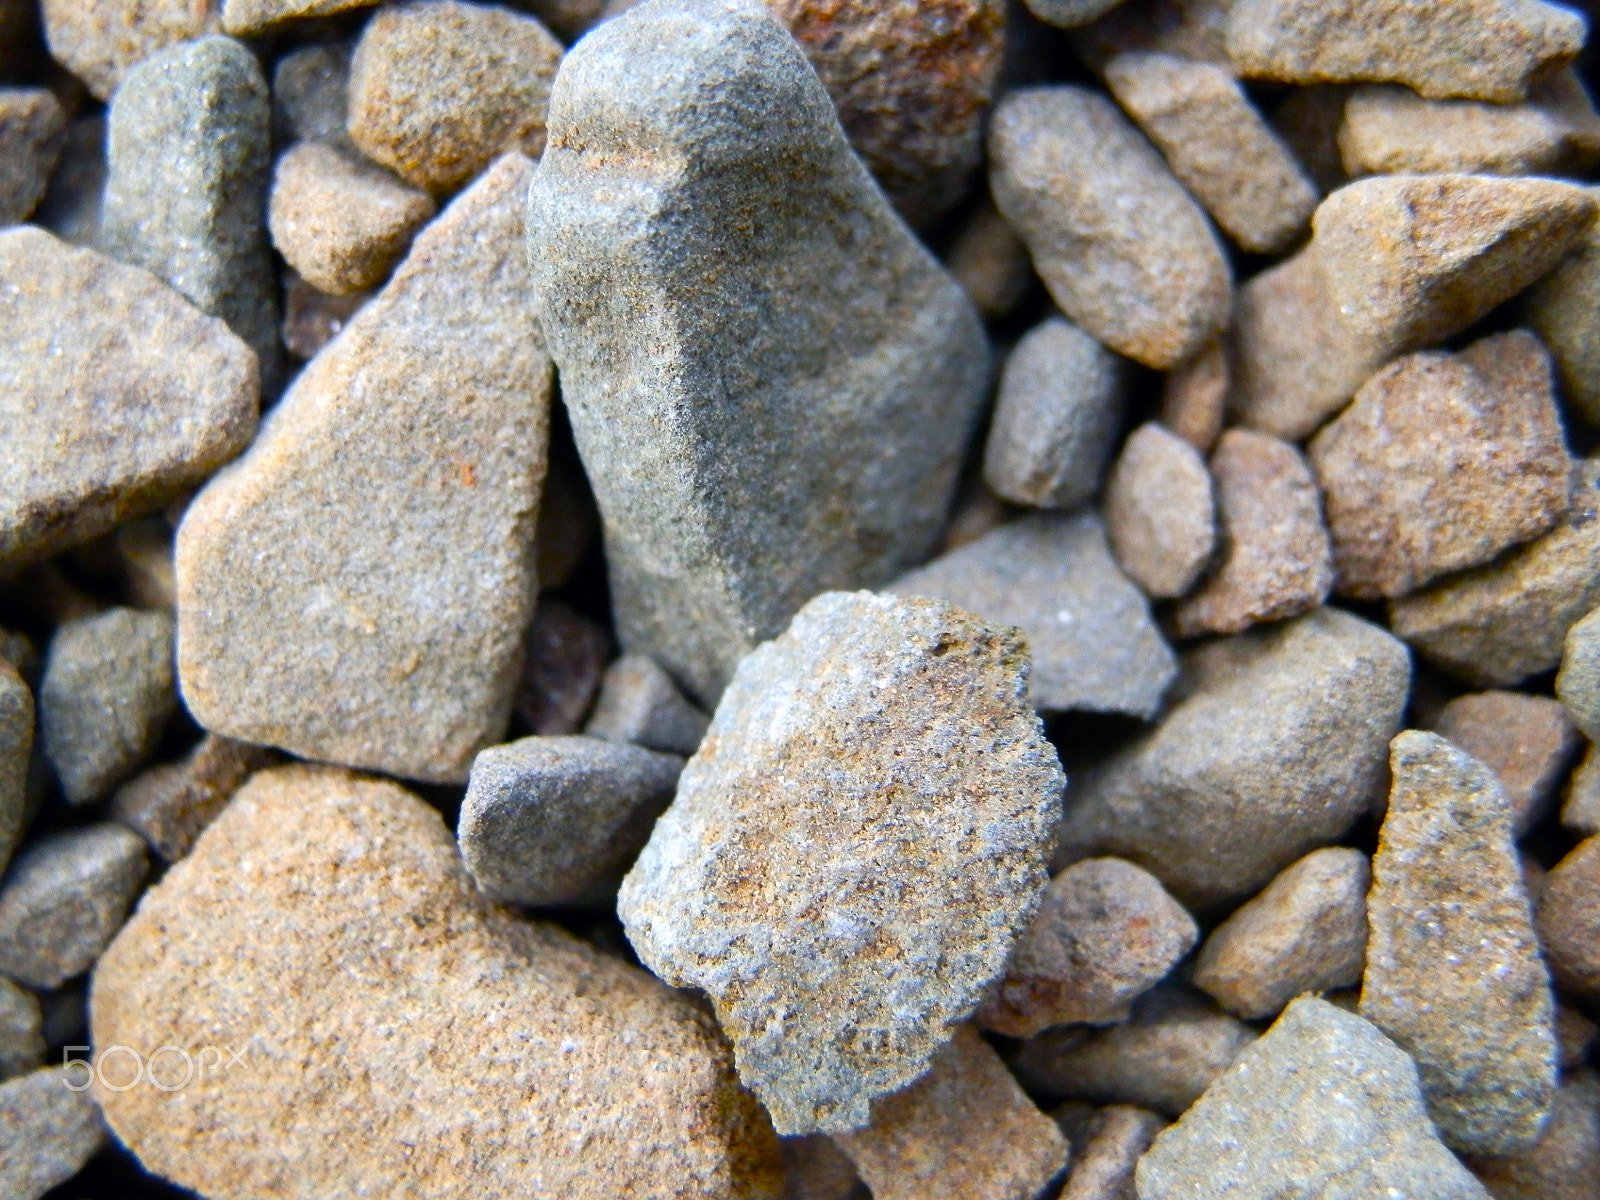 Olympus SZ-10 sample photo. Pebbles on the ground photography